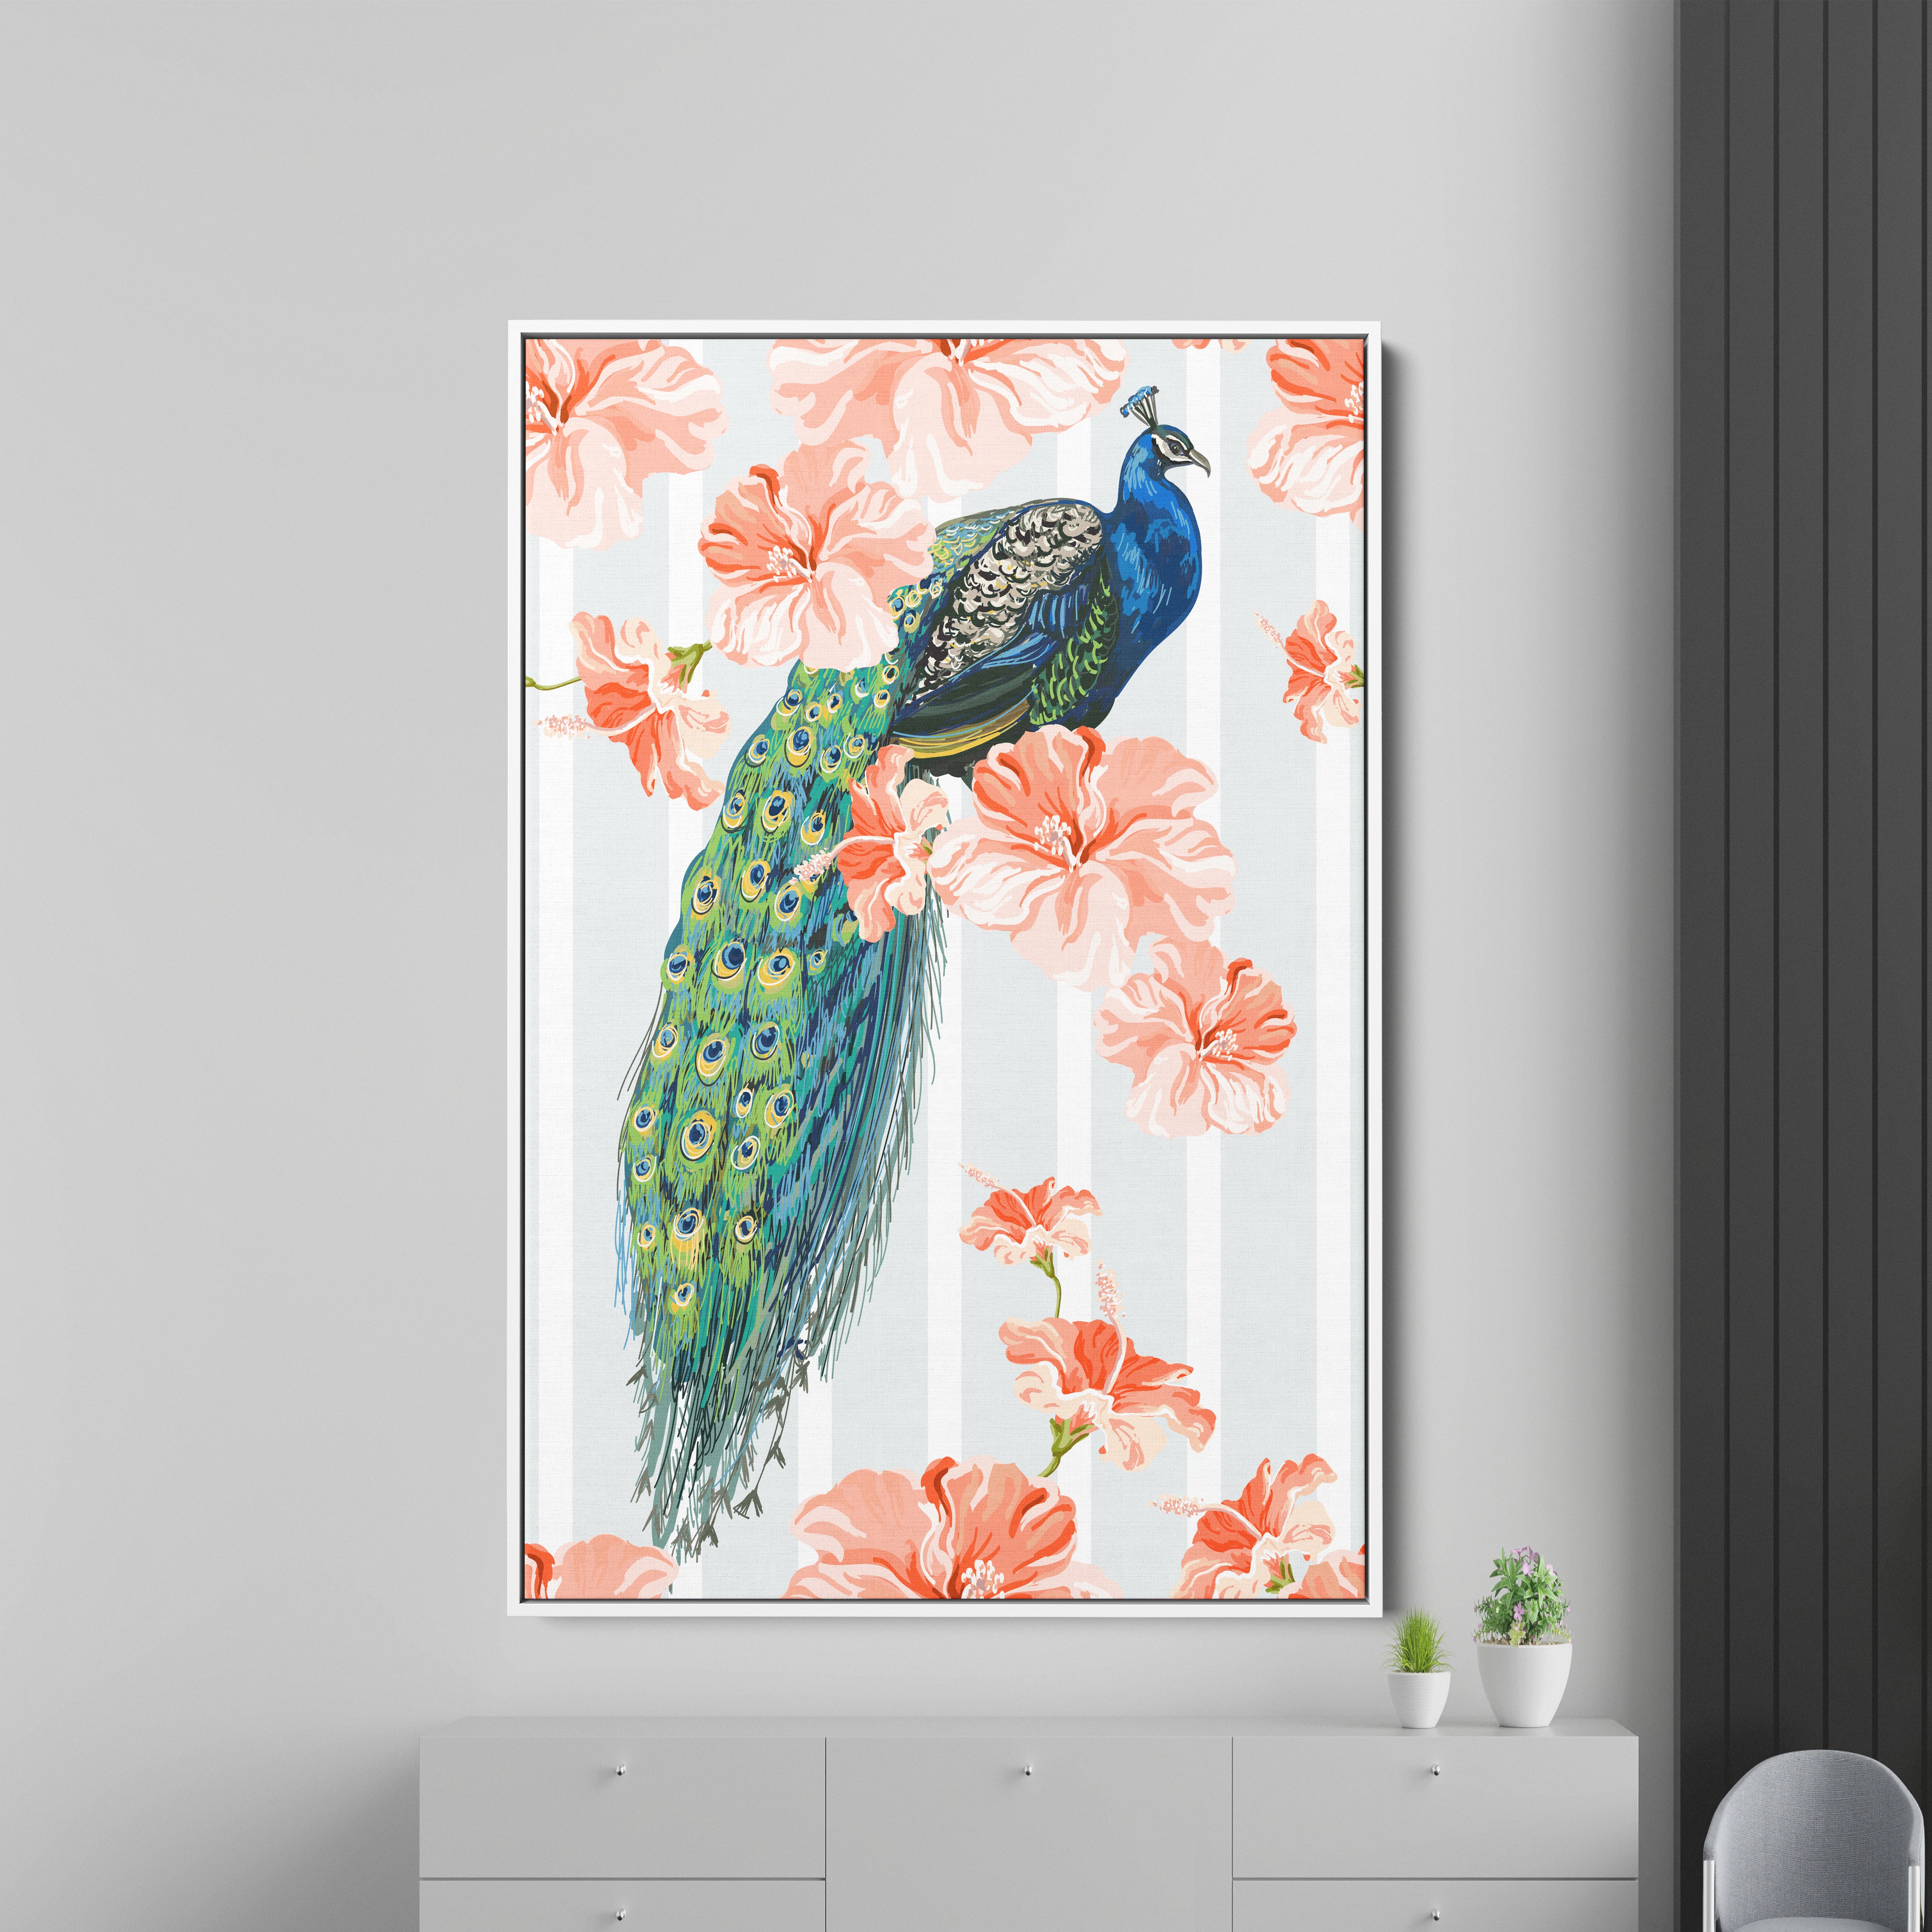 Beautiful Flower With Peacock Canvas Wall Painting